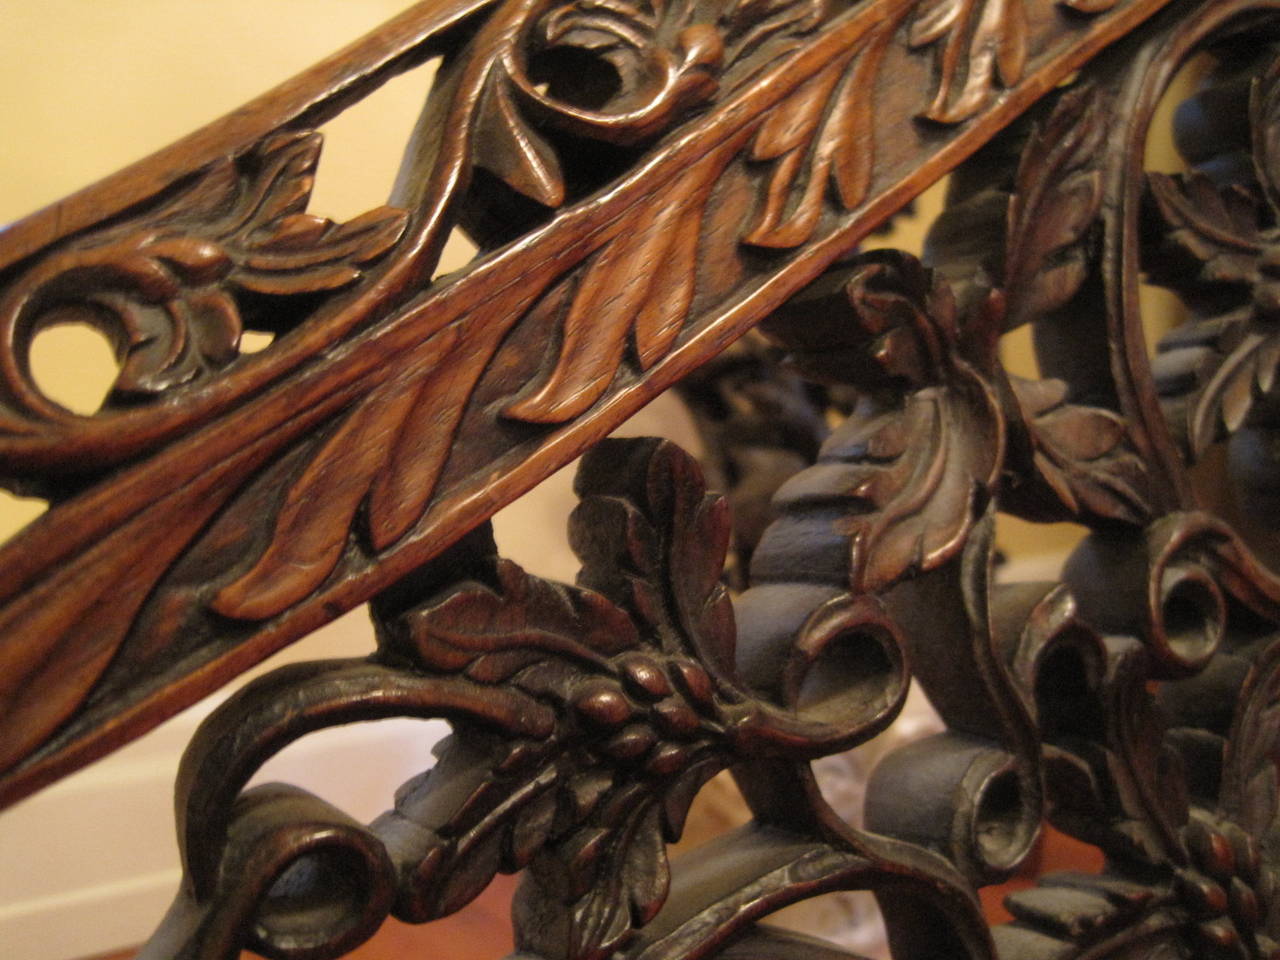 Anglo Indian Settee, Late 18th or Early 19th Century Carved Rosewood In Good Condition For Sale In Hamilton, Ontario